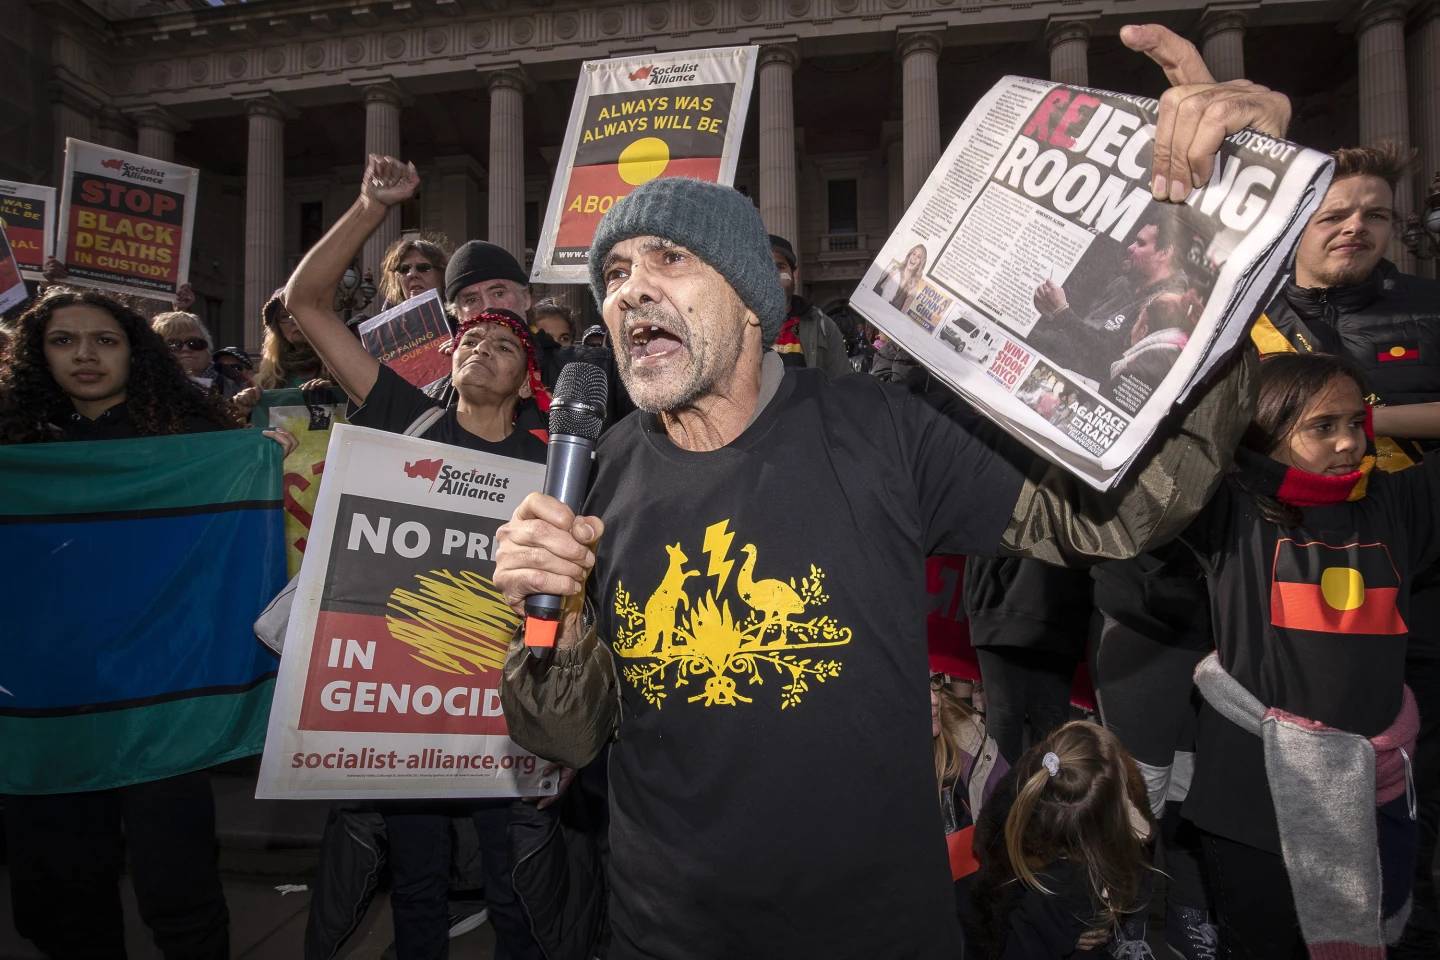 Robbie Thorpe talks during a NAIDOC, National Aborigines and Islanders Day Observance Committee, march in Melbourne, Australia, July 6, 2018. (Credit: Daniel Pockett/AAP image via AP.)